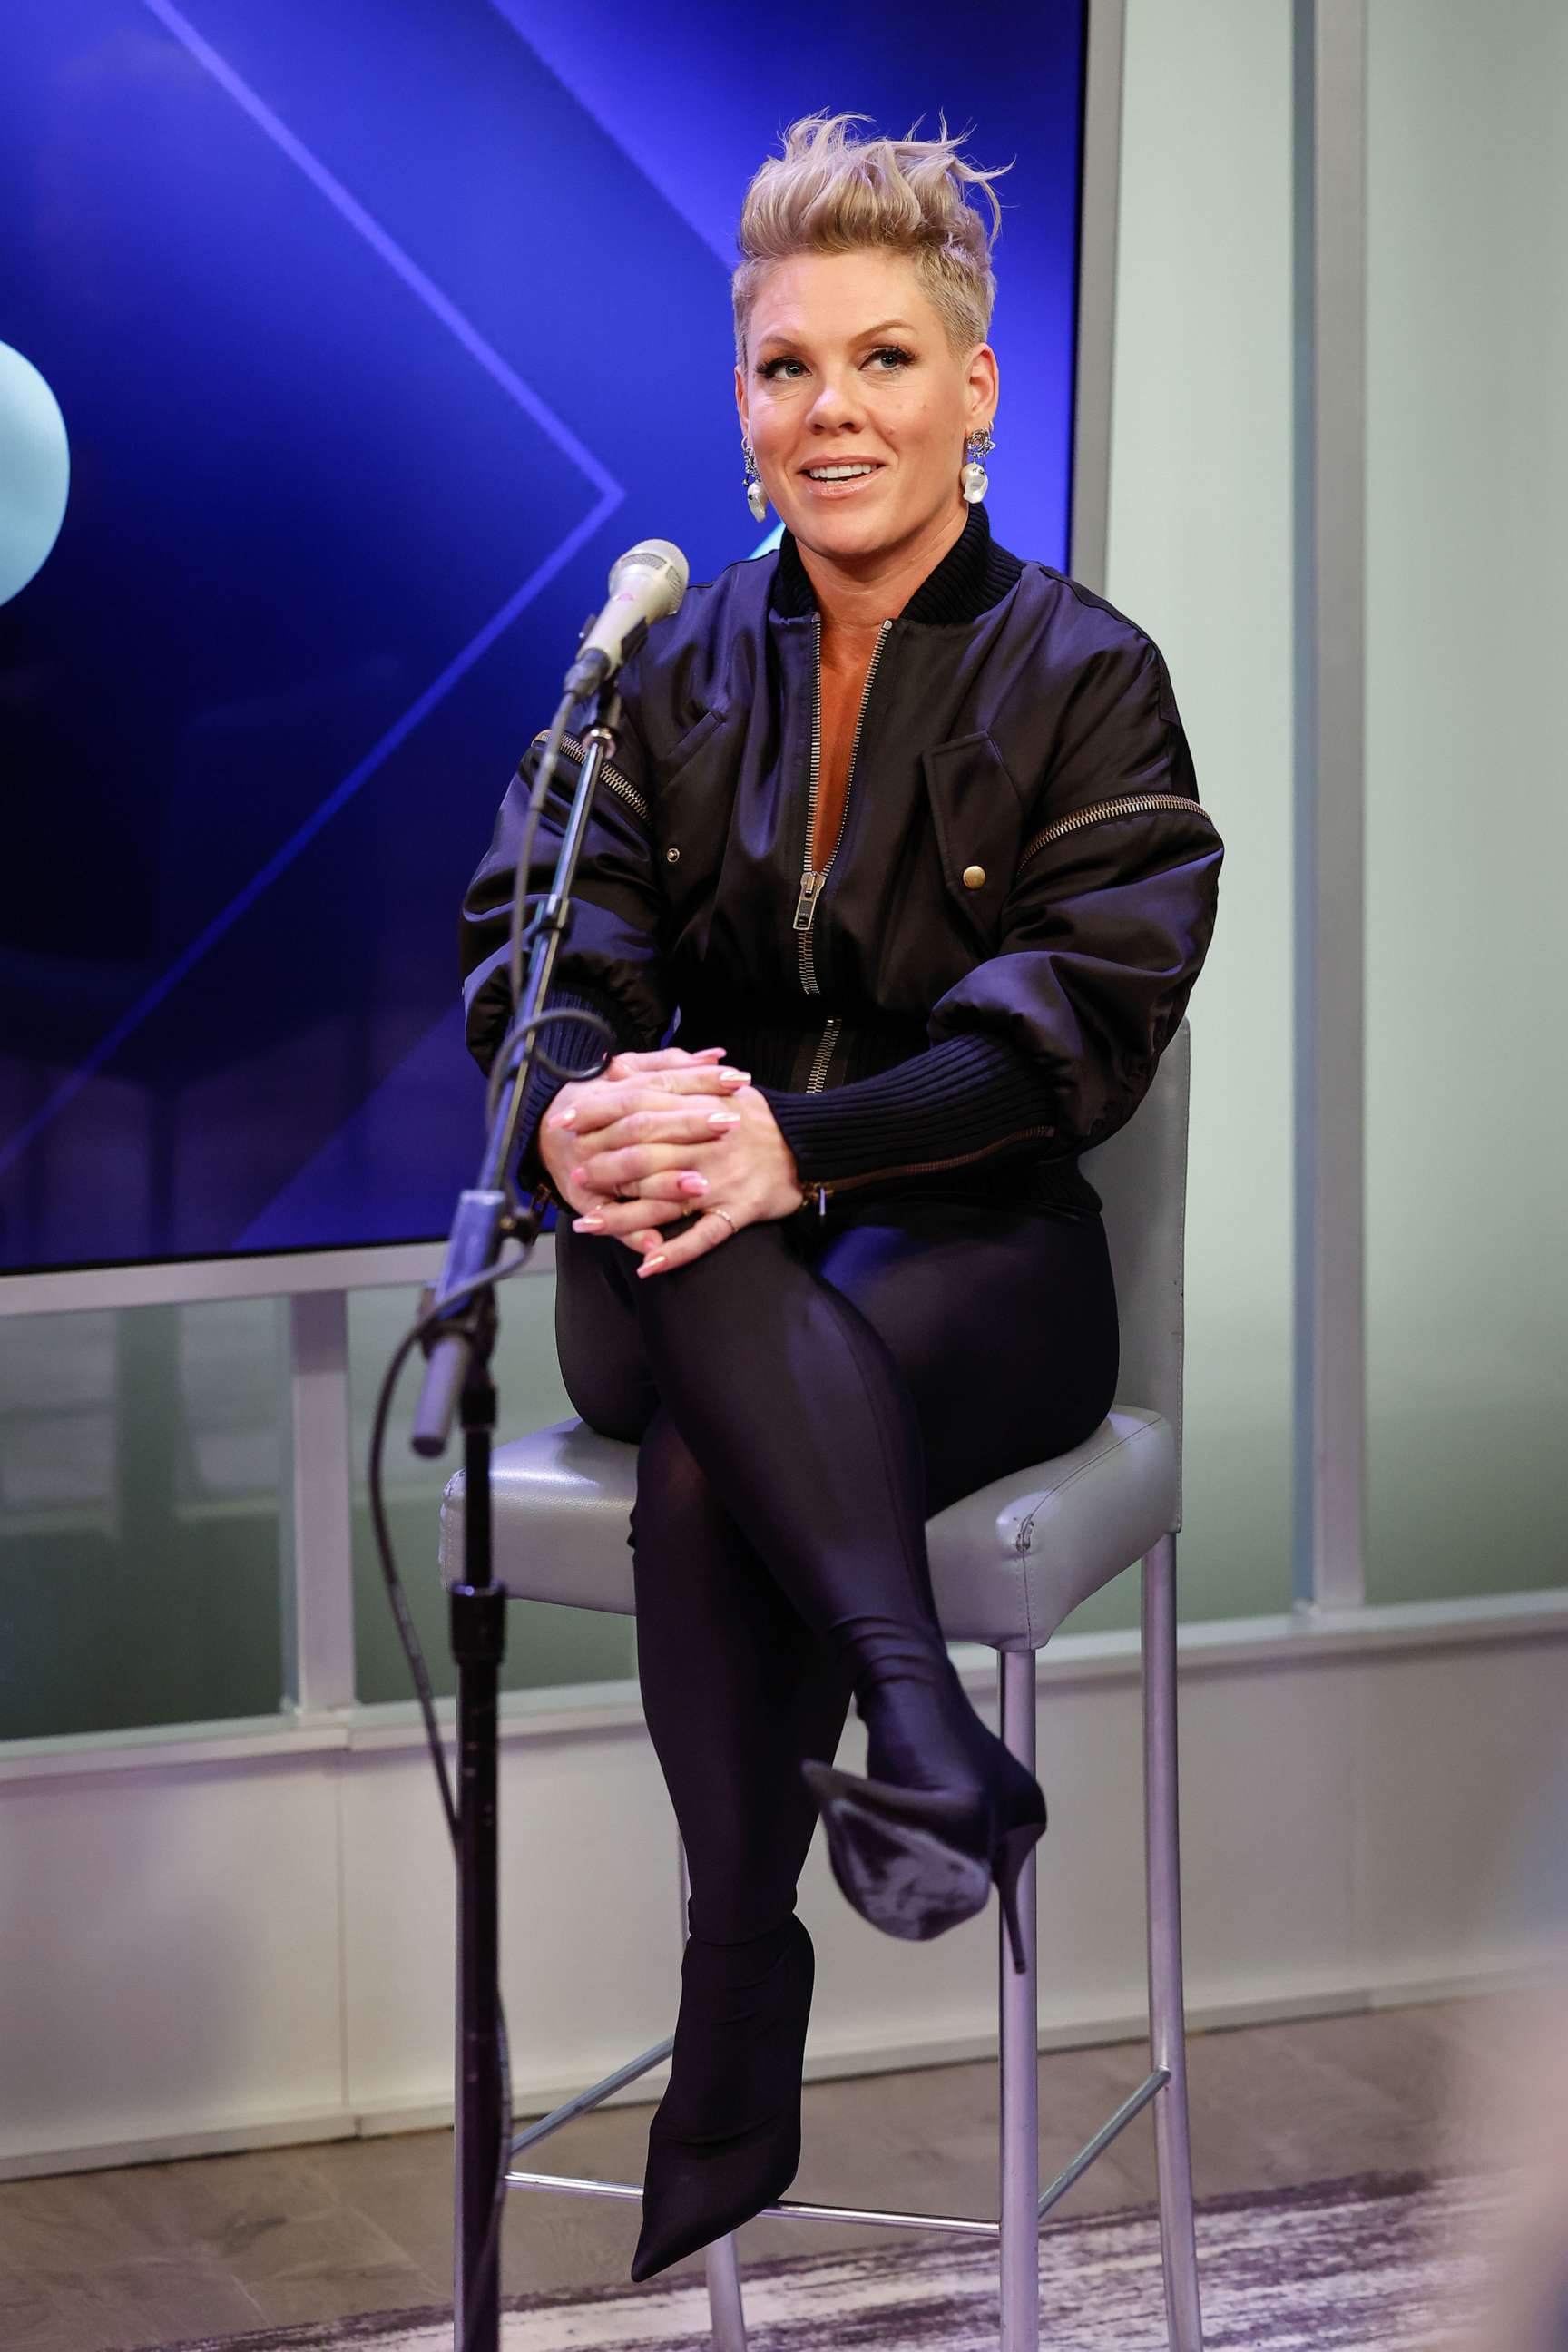 PHOTO: P!nk is interviewed during her visit to SiriusXM Studios, Feb. 22, 2023, in New York City.